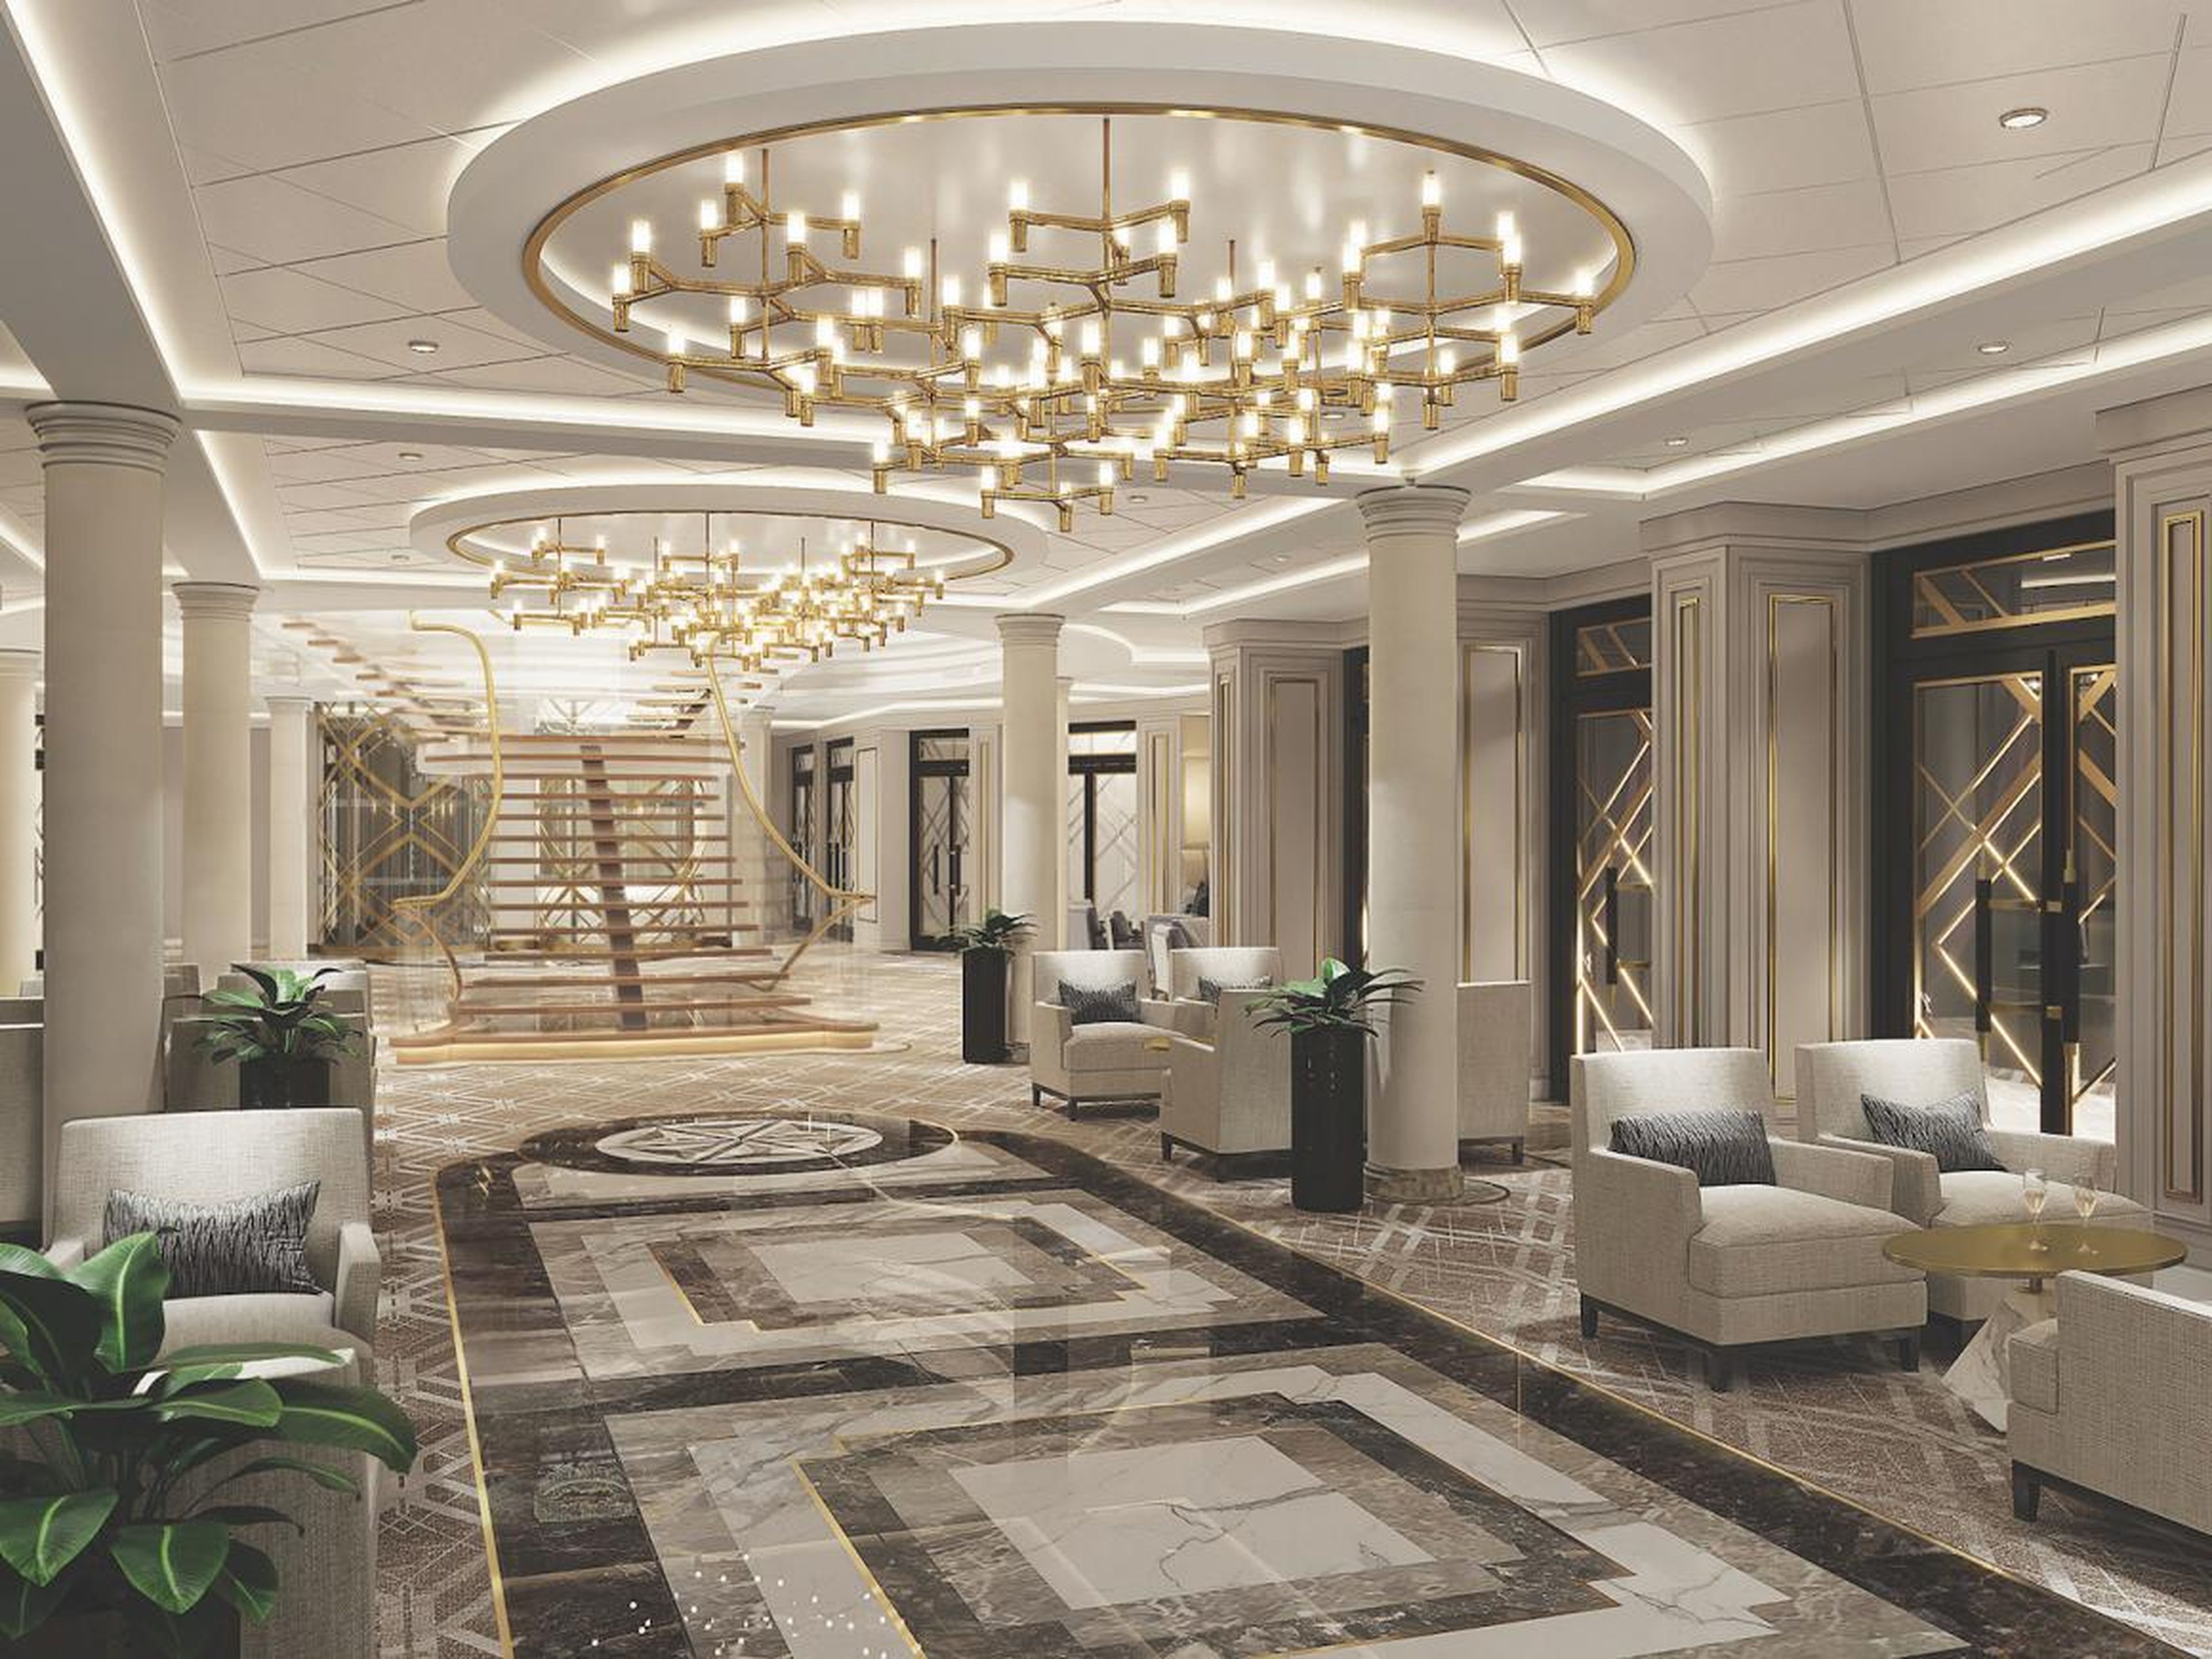 The rest of the Seven Seas Splendor will also be luxurious.